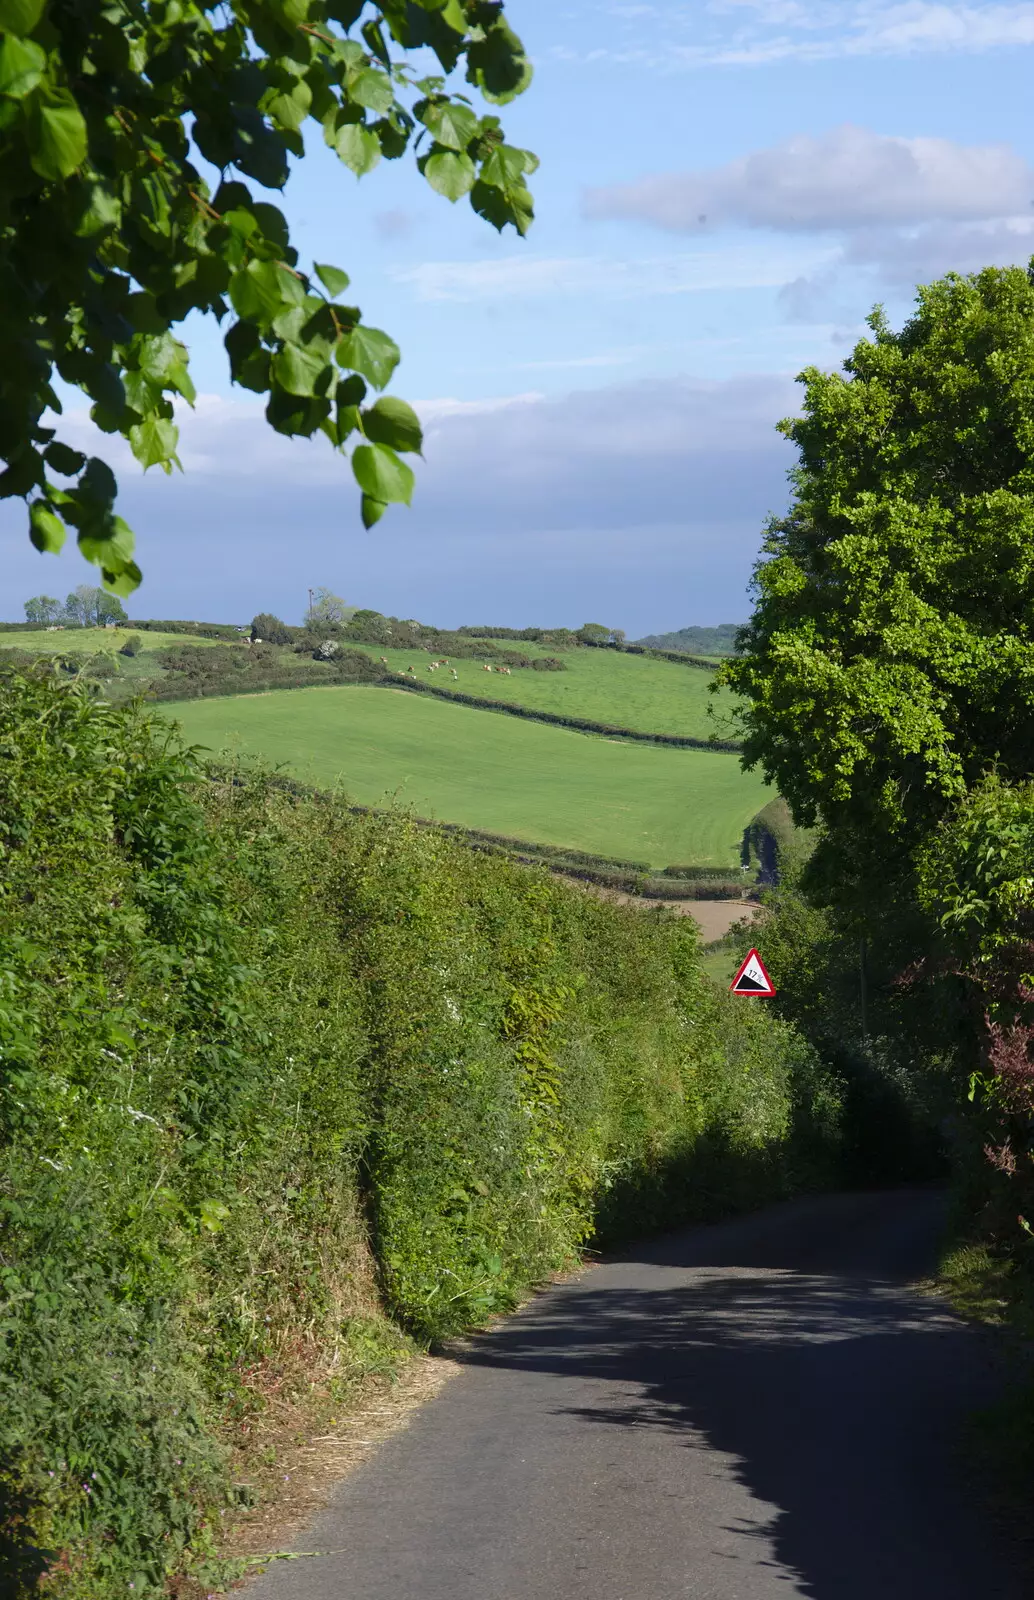 A deep lane, from Chagford Lido and a Trip to Parke, Bovey Tracey, Devon - 25th May 2019